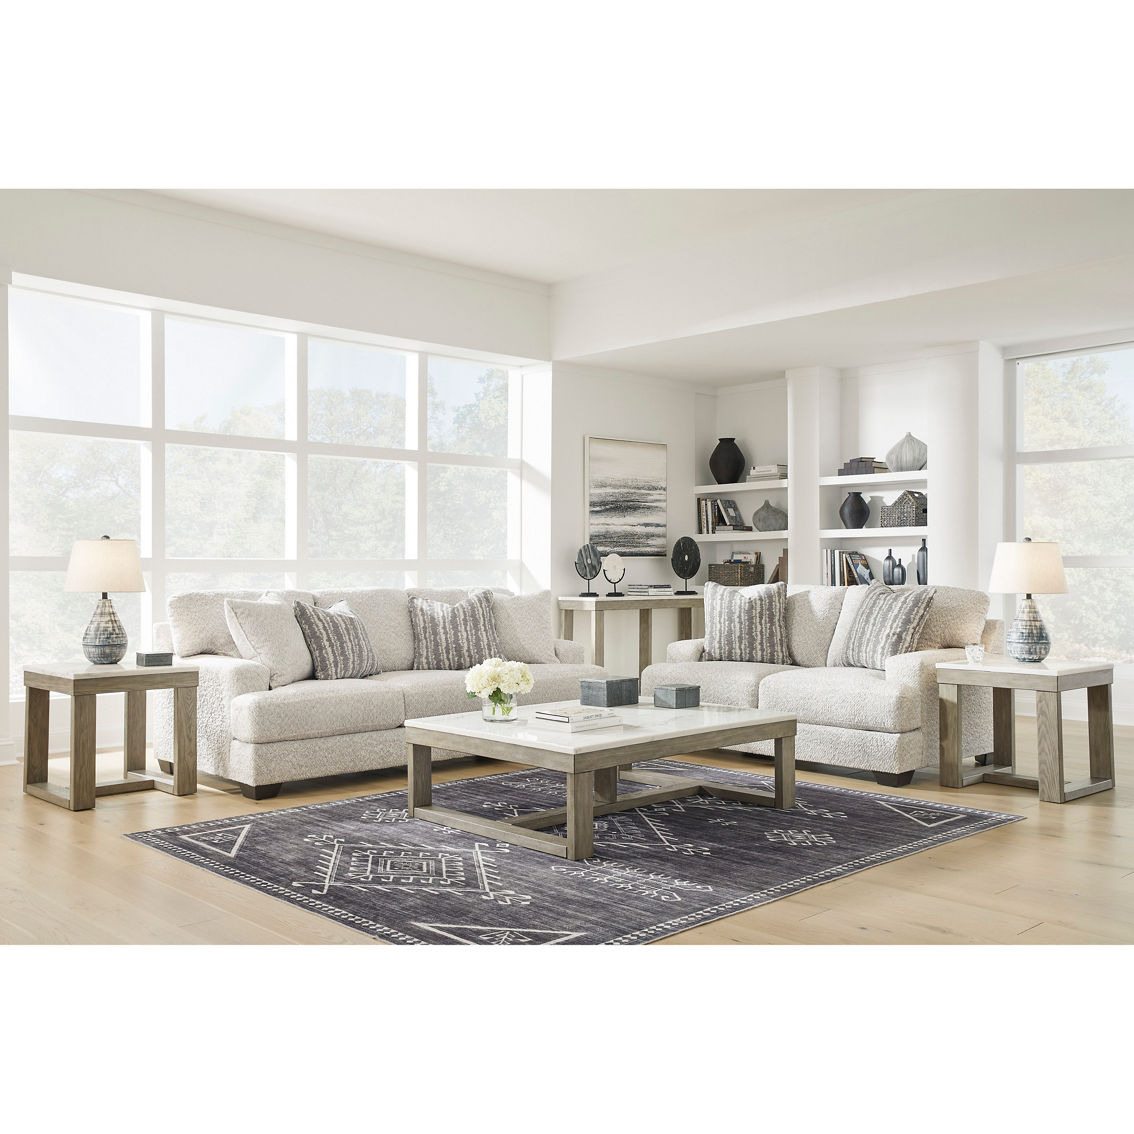 Signature Design by Ashley Brebryan Sofa and Loveseat - Image 2 of 2